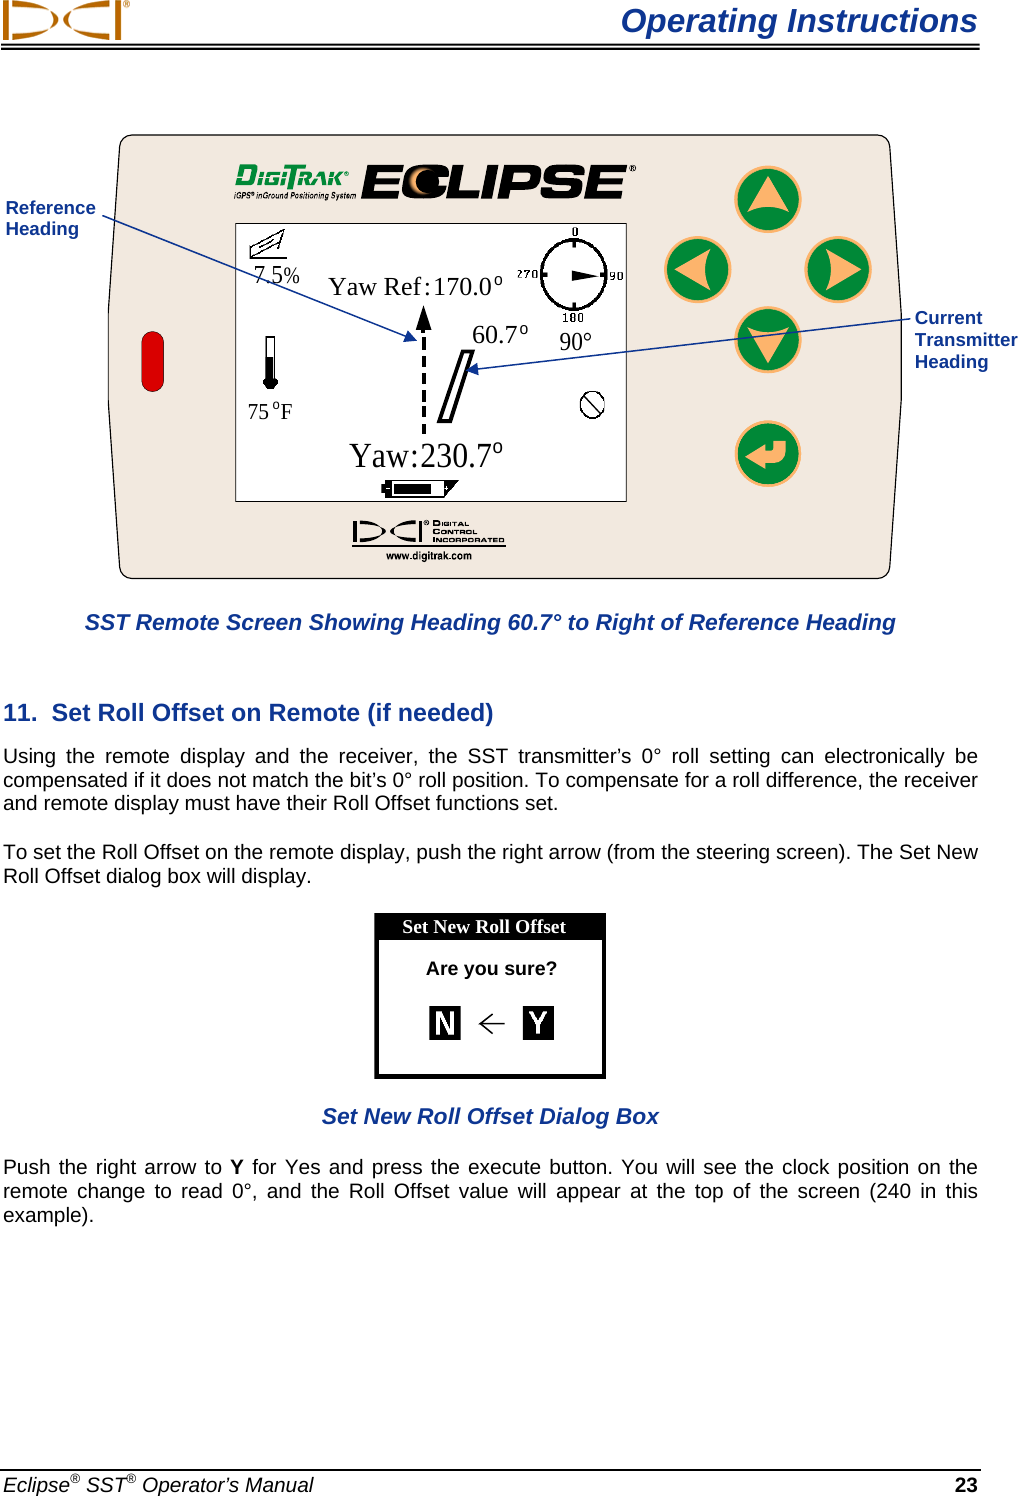  Operating Instructions Eclipse® SST® Operator’s Manual  23      75oFYaw Ref:170.0oYaw:230.7o60.7o90°7.5% SST Remote Screen Showing Heading 60.7° to Right of Reference Heading 11.  Set Roll Offset on Remote (if needed)  Using the remote display and the receiver, the SST transmitter’s 0° roll setting can electronically be compensated if it does not match the bit’s 0° roll position. To compensate for a roll difference, the receiver and remote display must have their Roll Offset functions set.   To set the Roll Offset on the remote display, push the right arrow (from the steering screen). The Set New Roll Offset dialog box will display.  Set New Roll OffsetAre you sure? Set New Roll Offset Dialog Box Push the right arrow to Y for Yes and press the execute button. You will see the clock position on the remote change to read 0°, and the Roll Offset value will appear at the top of the screen (240 in this example).  Reference Heading  Current Transmitter Heading 